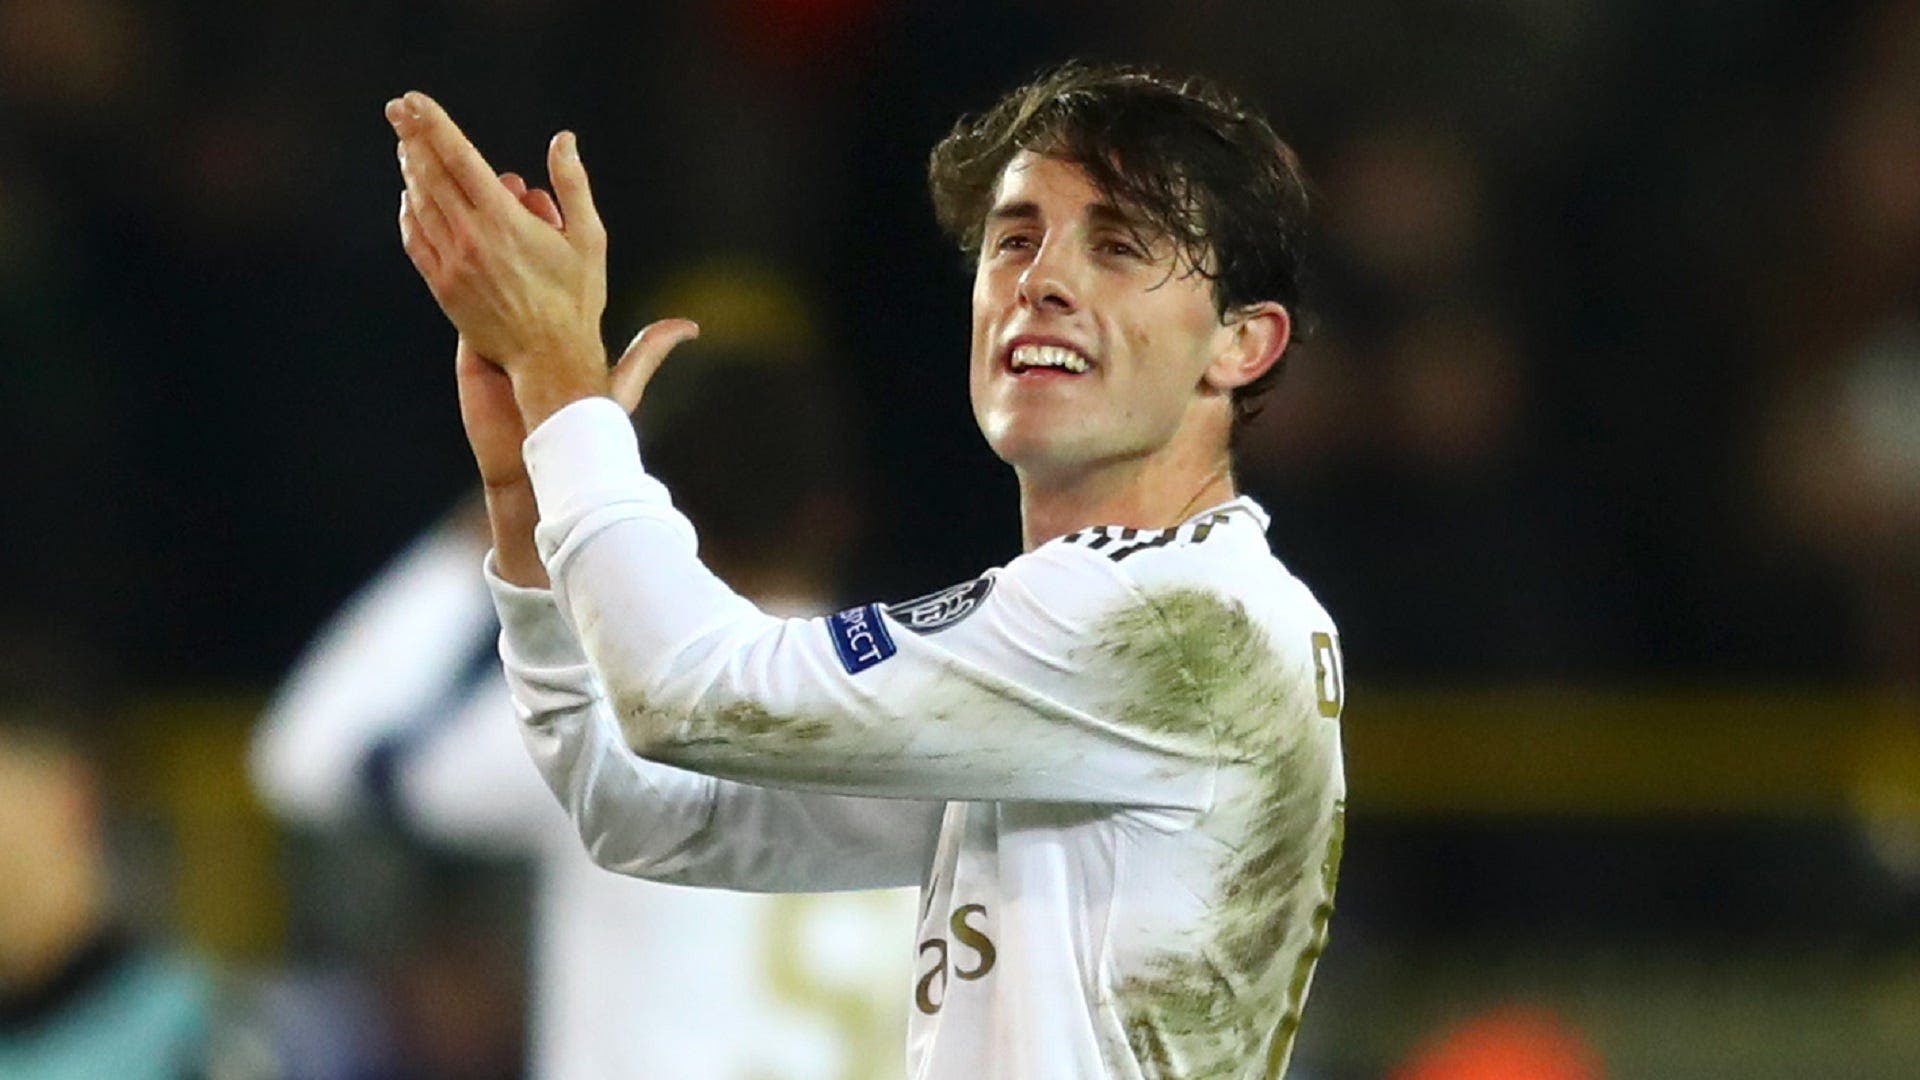 Master move by Real Sociedad lowers Odriozola's price in half
	
